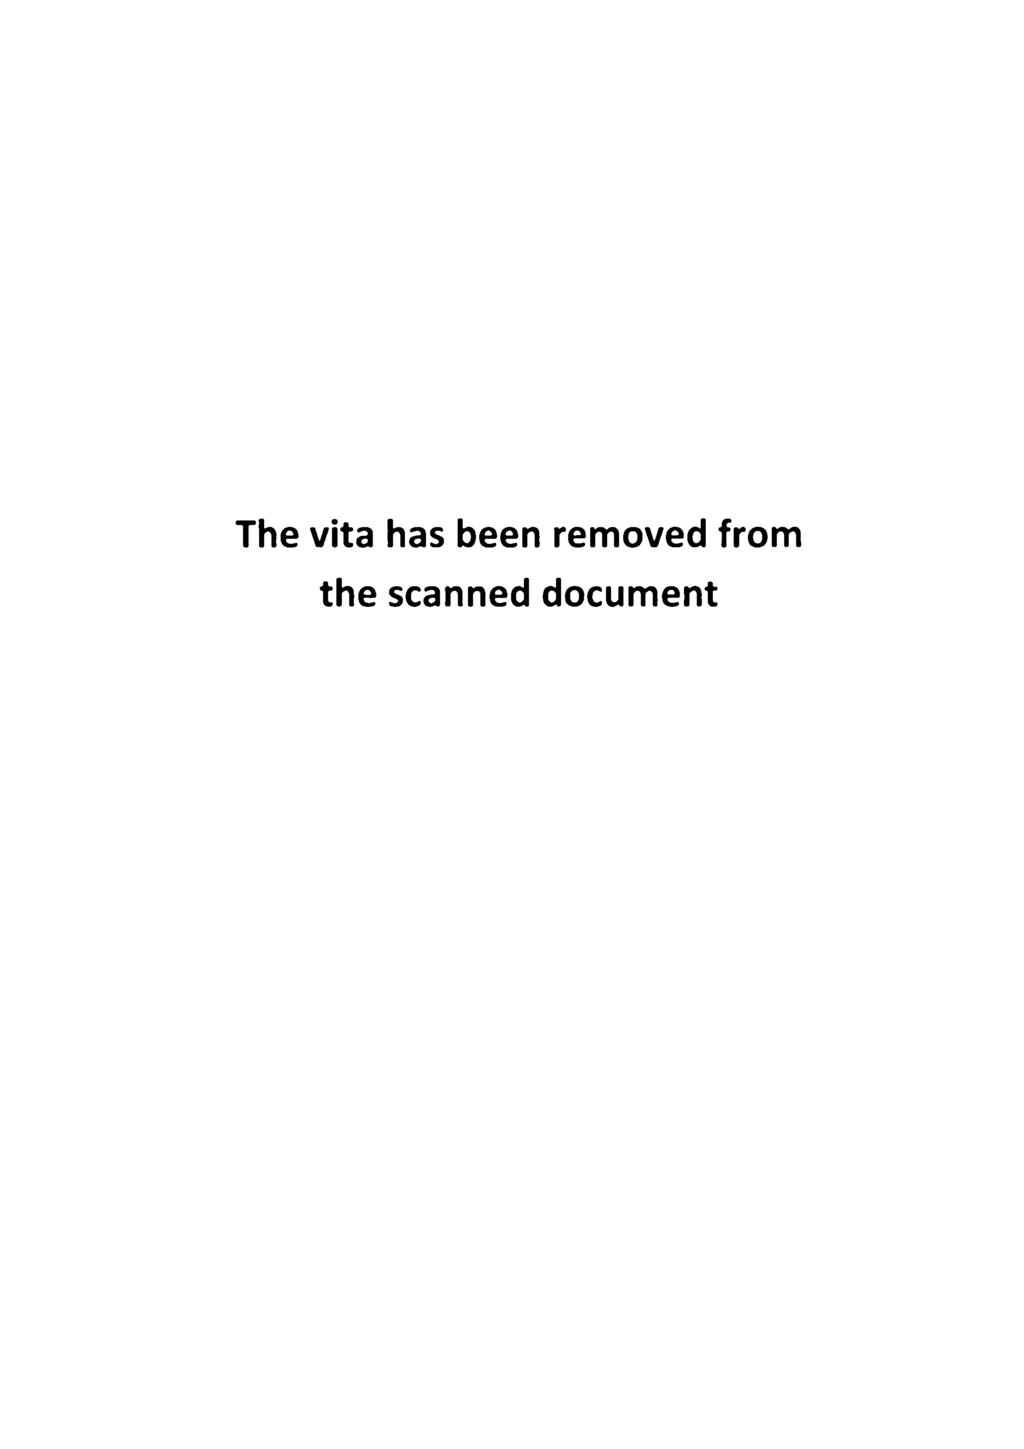 The vita has been removed